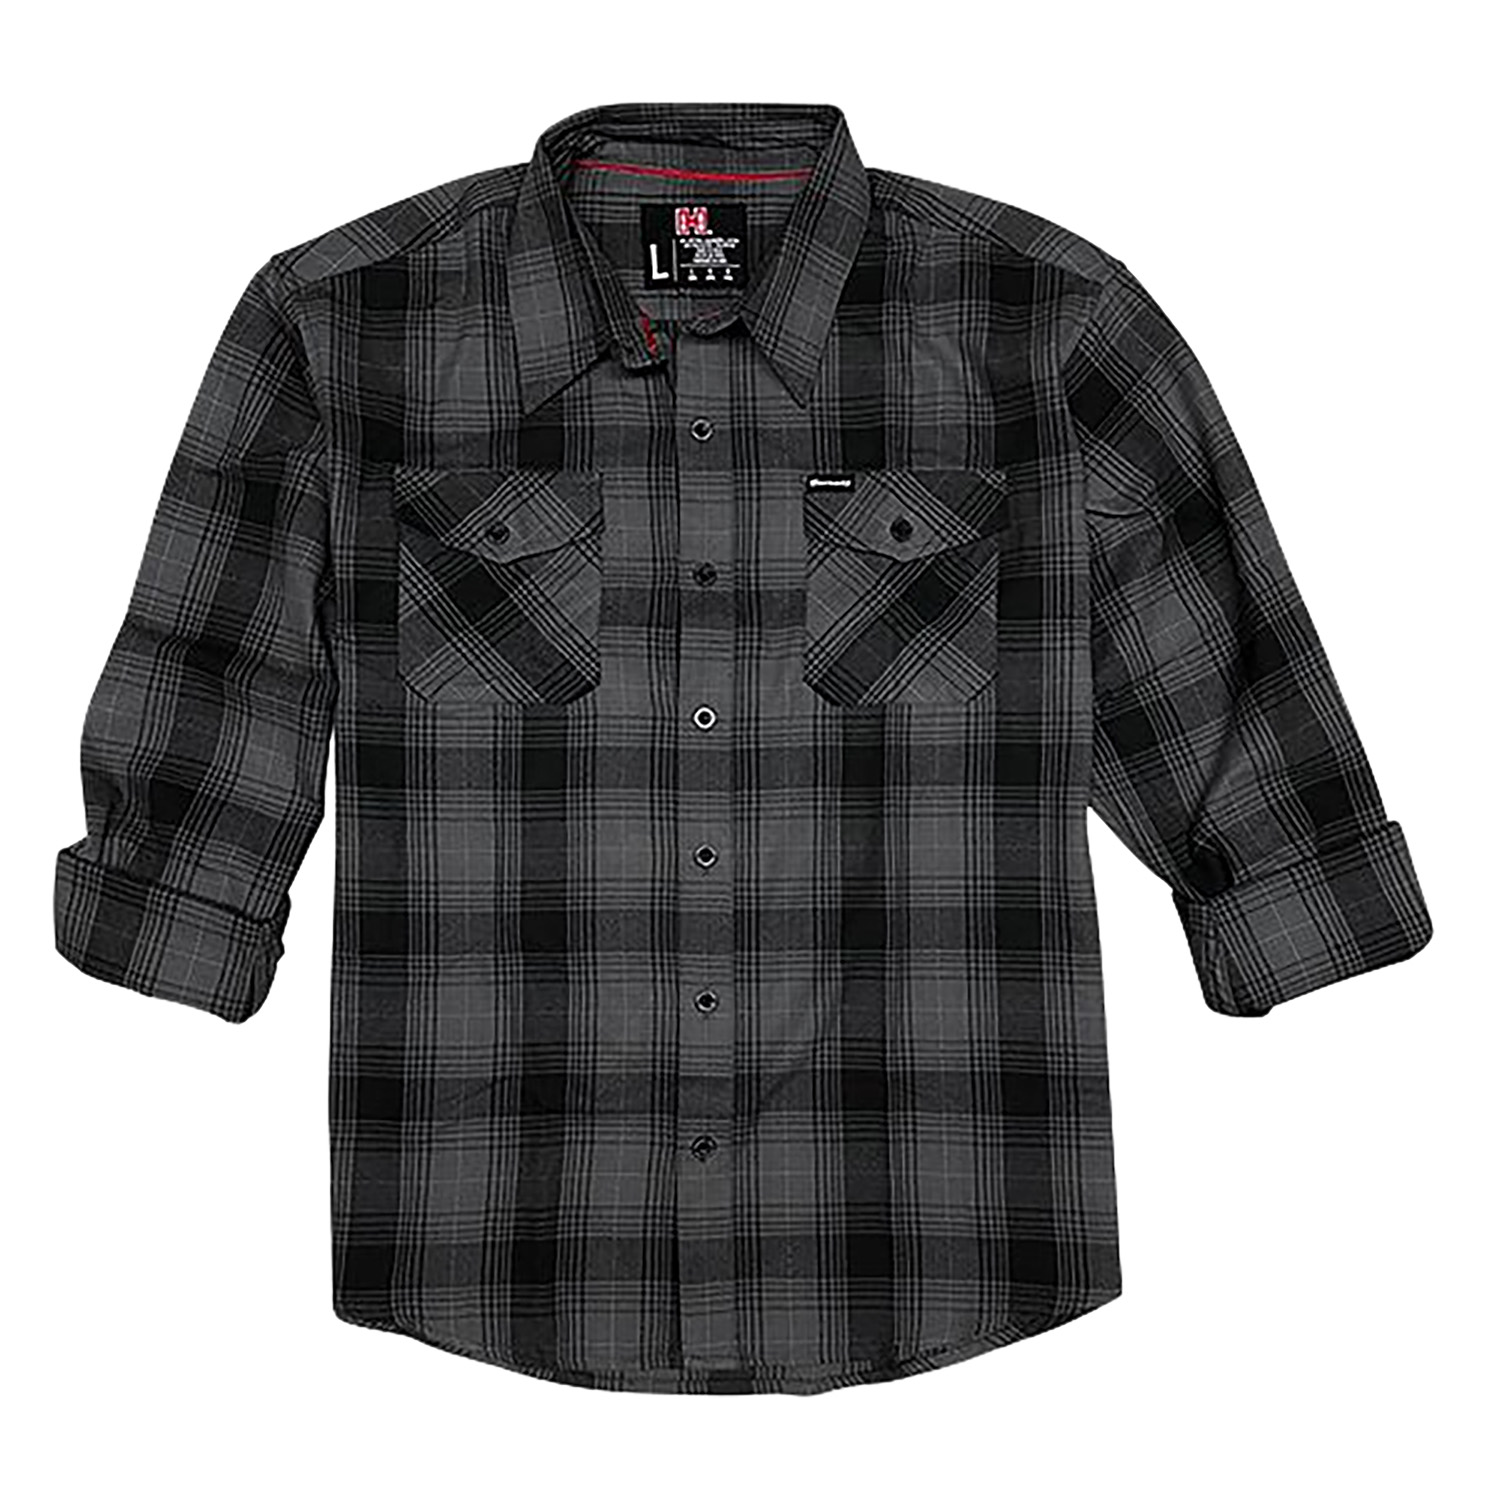 Hornady Gear 32226 Flannel Shirt 3Xl Gray / Black Cotton / Polyester Relaxed Fit Button Up